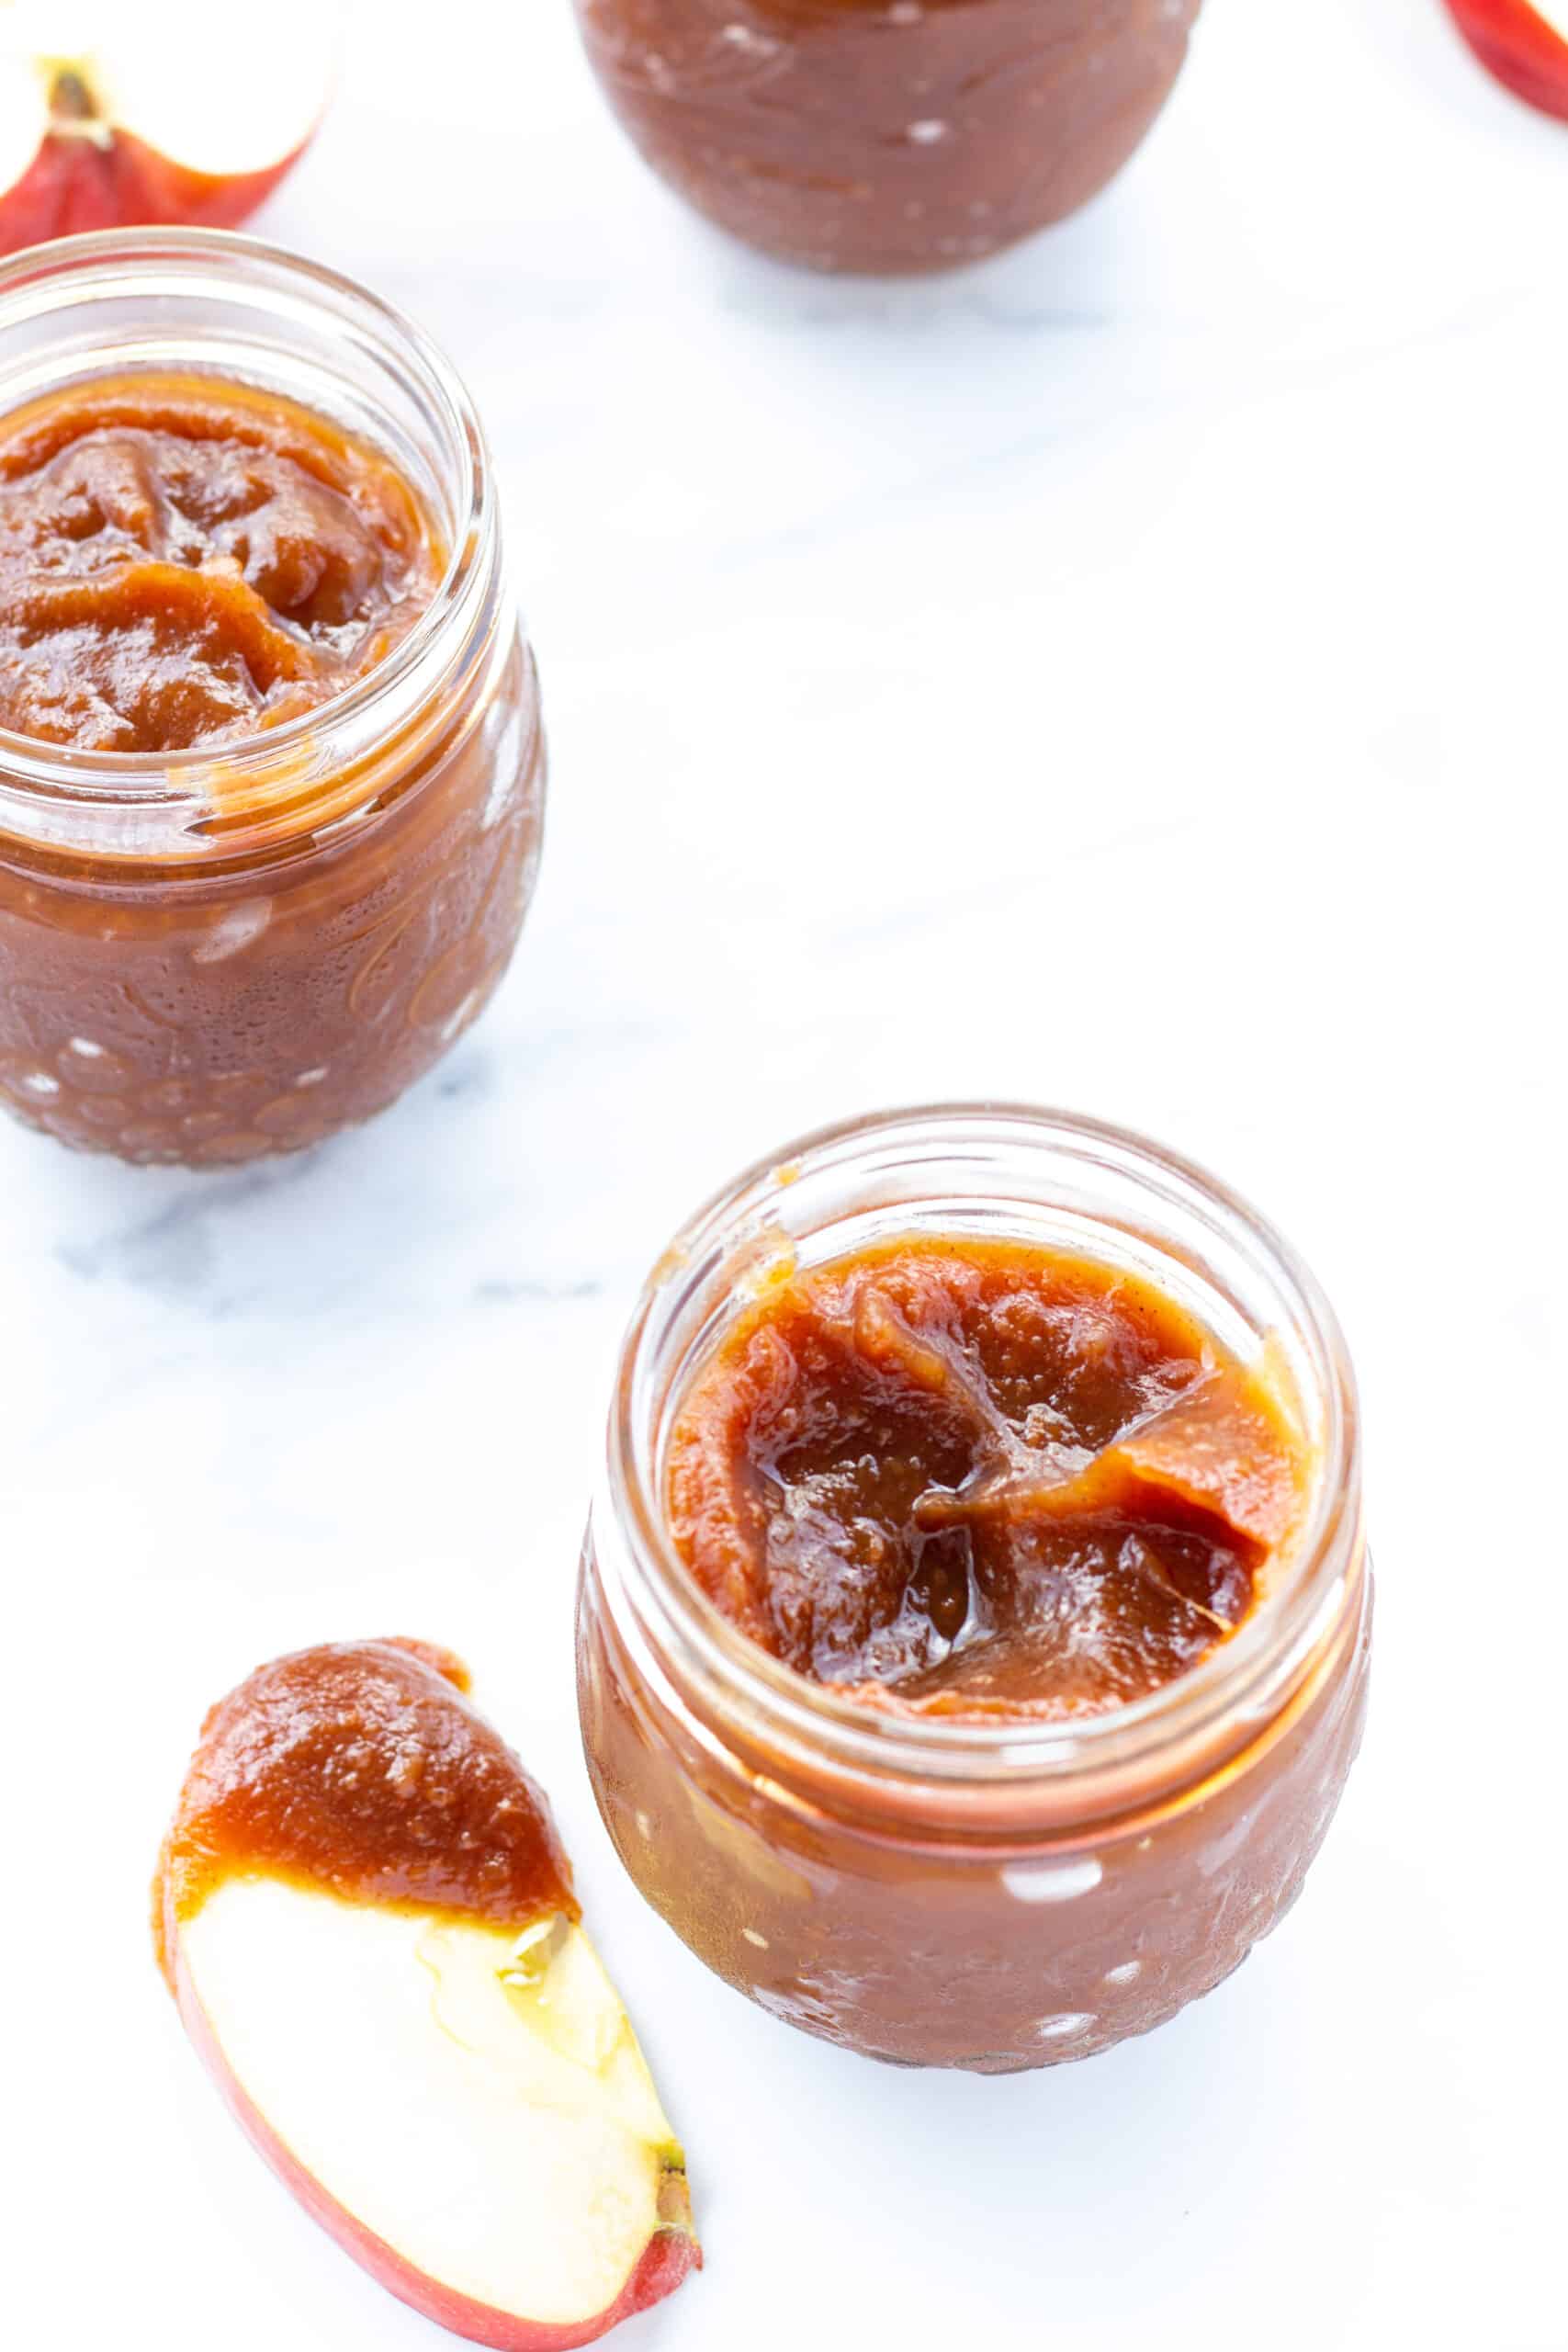 two jars of apple butter and one apple slice dipped in apple butter on a white counter